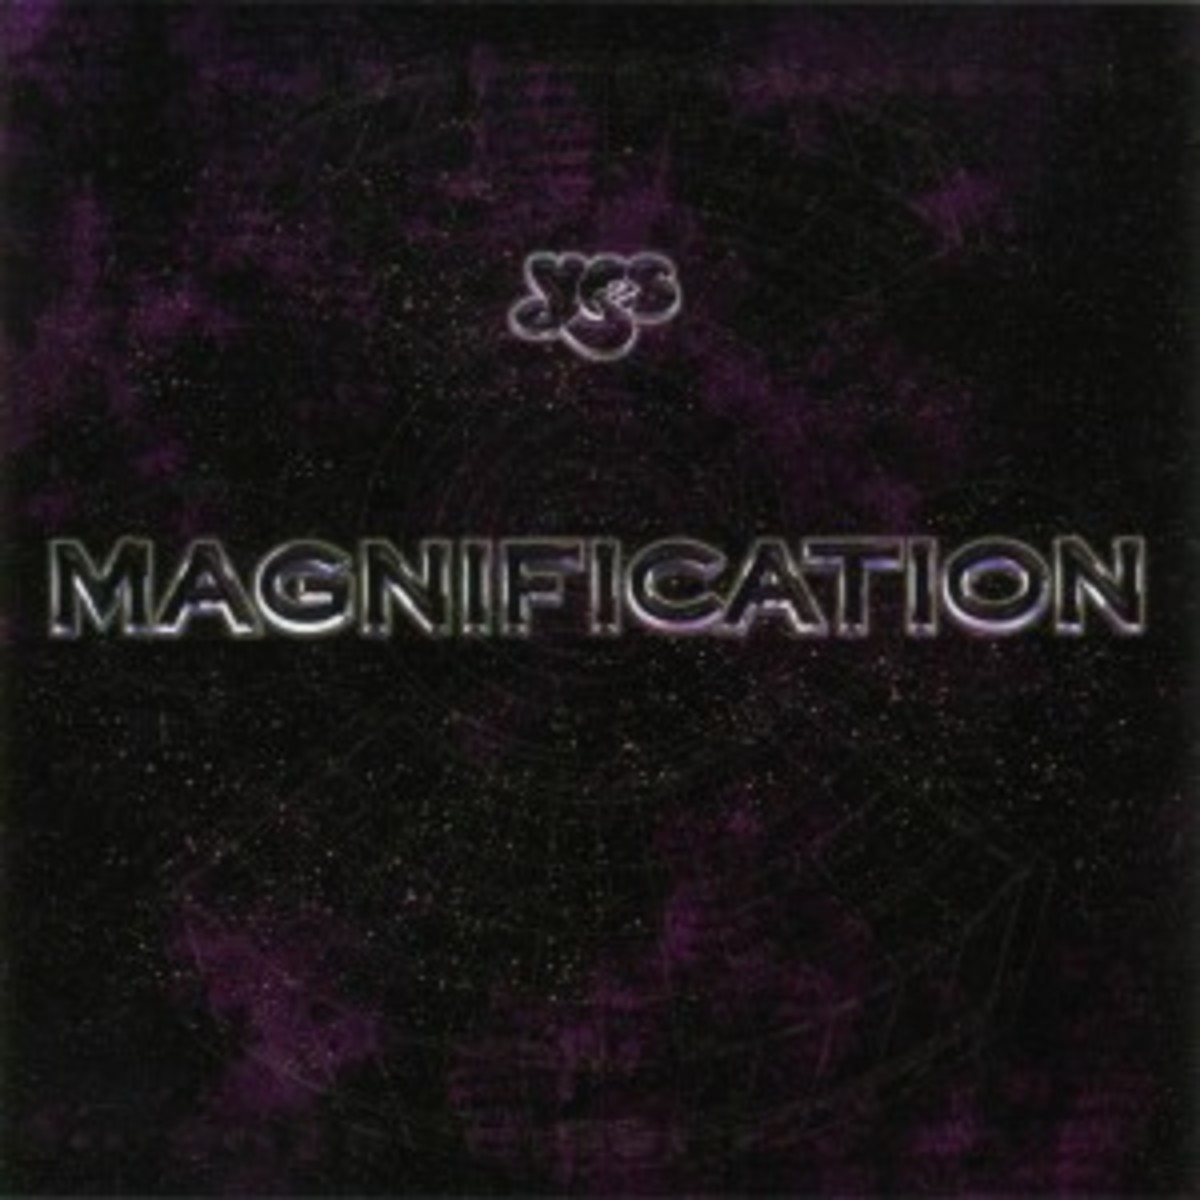 Yes Magnification album